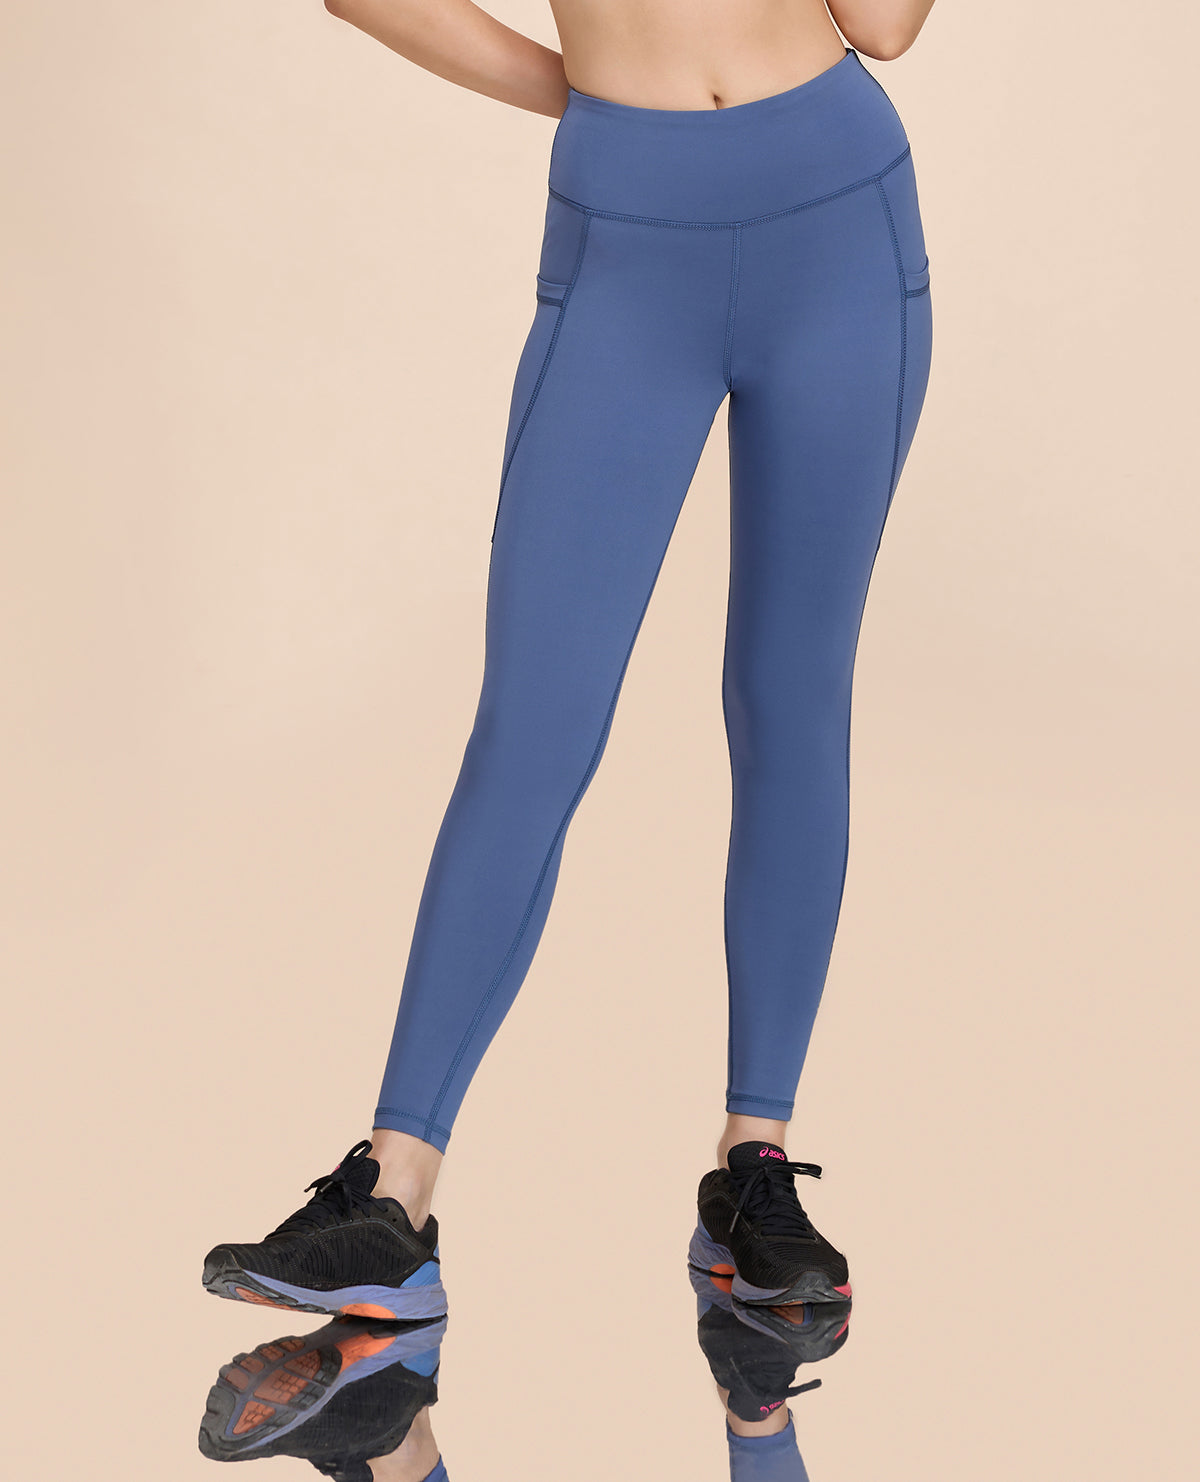 Buy Kica High Waisted 3/4 Leggings in Second SKN Fabric With Pockets for  Gym and Training Online